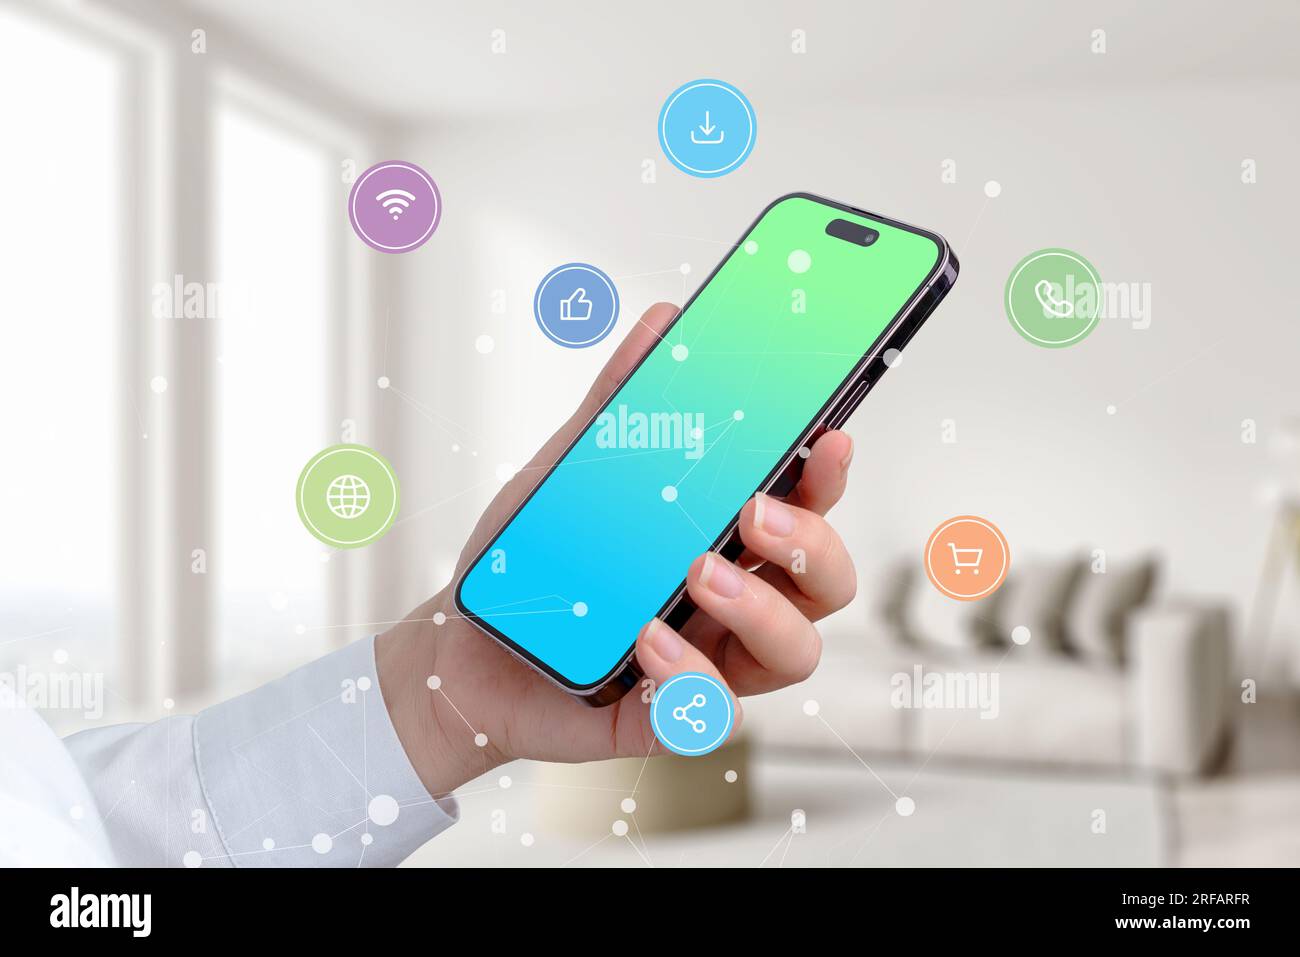 Phone in woman hand surrounded by famous social media app icons and concept network nodes Stock Photo